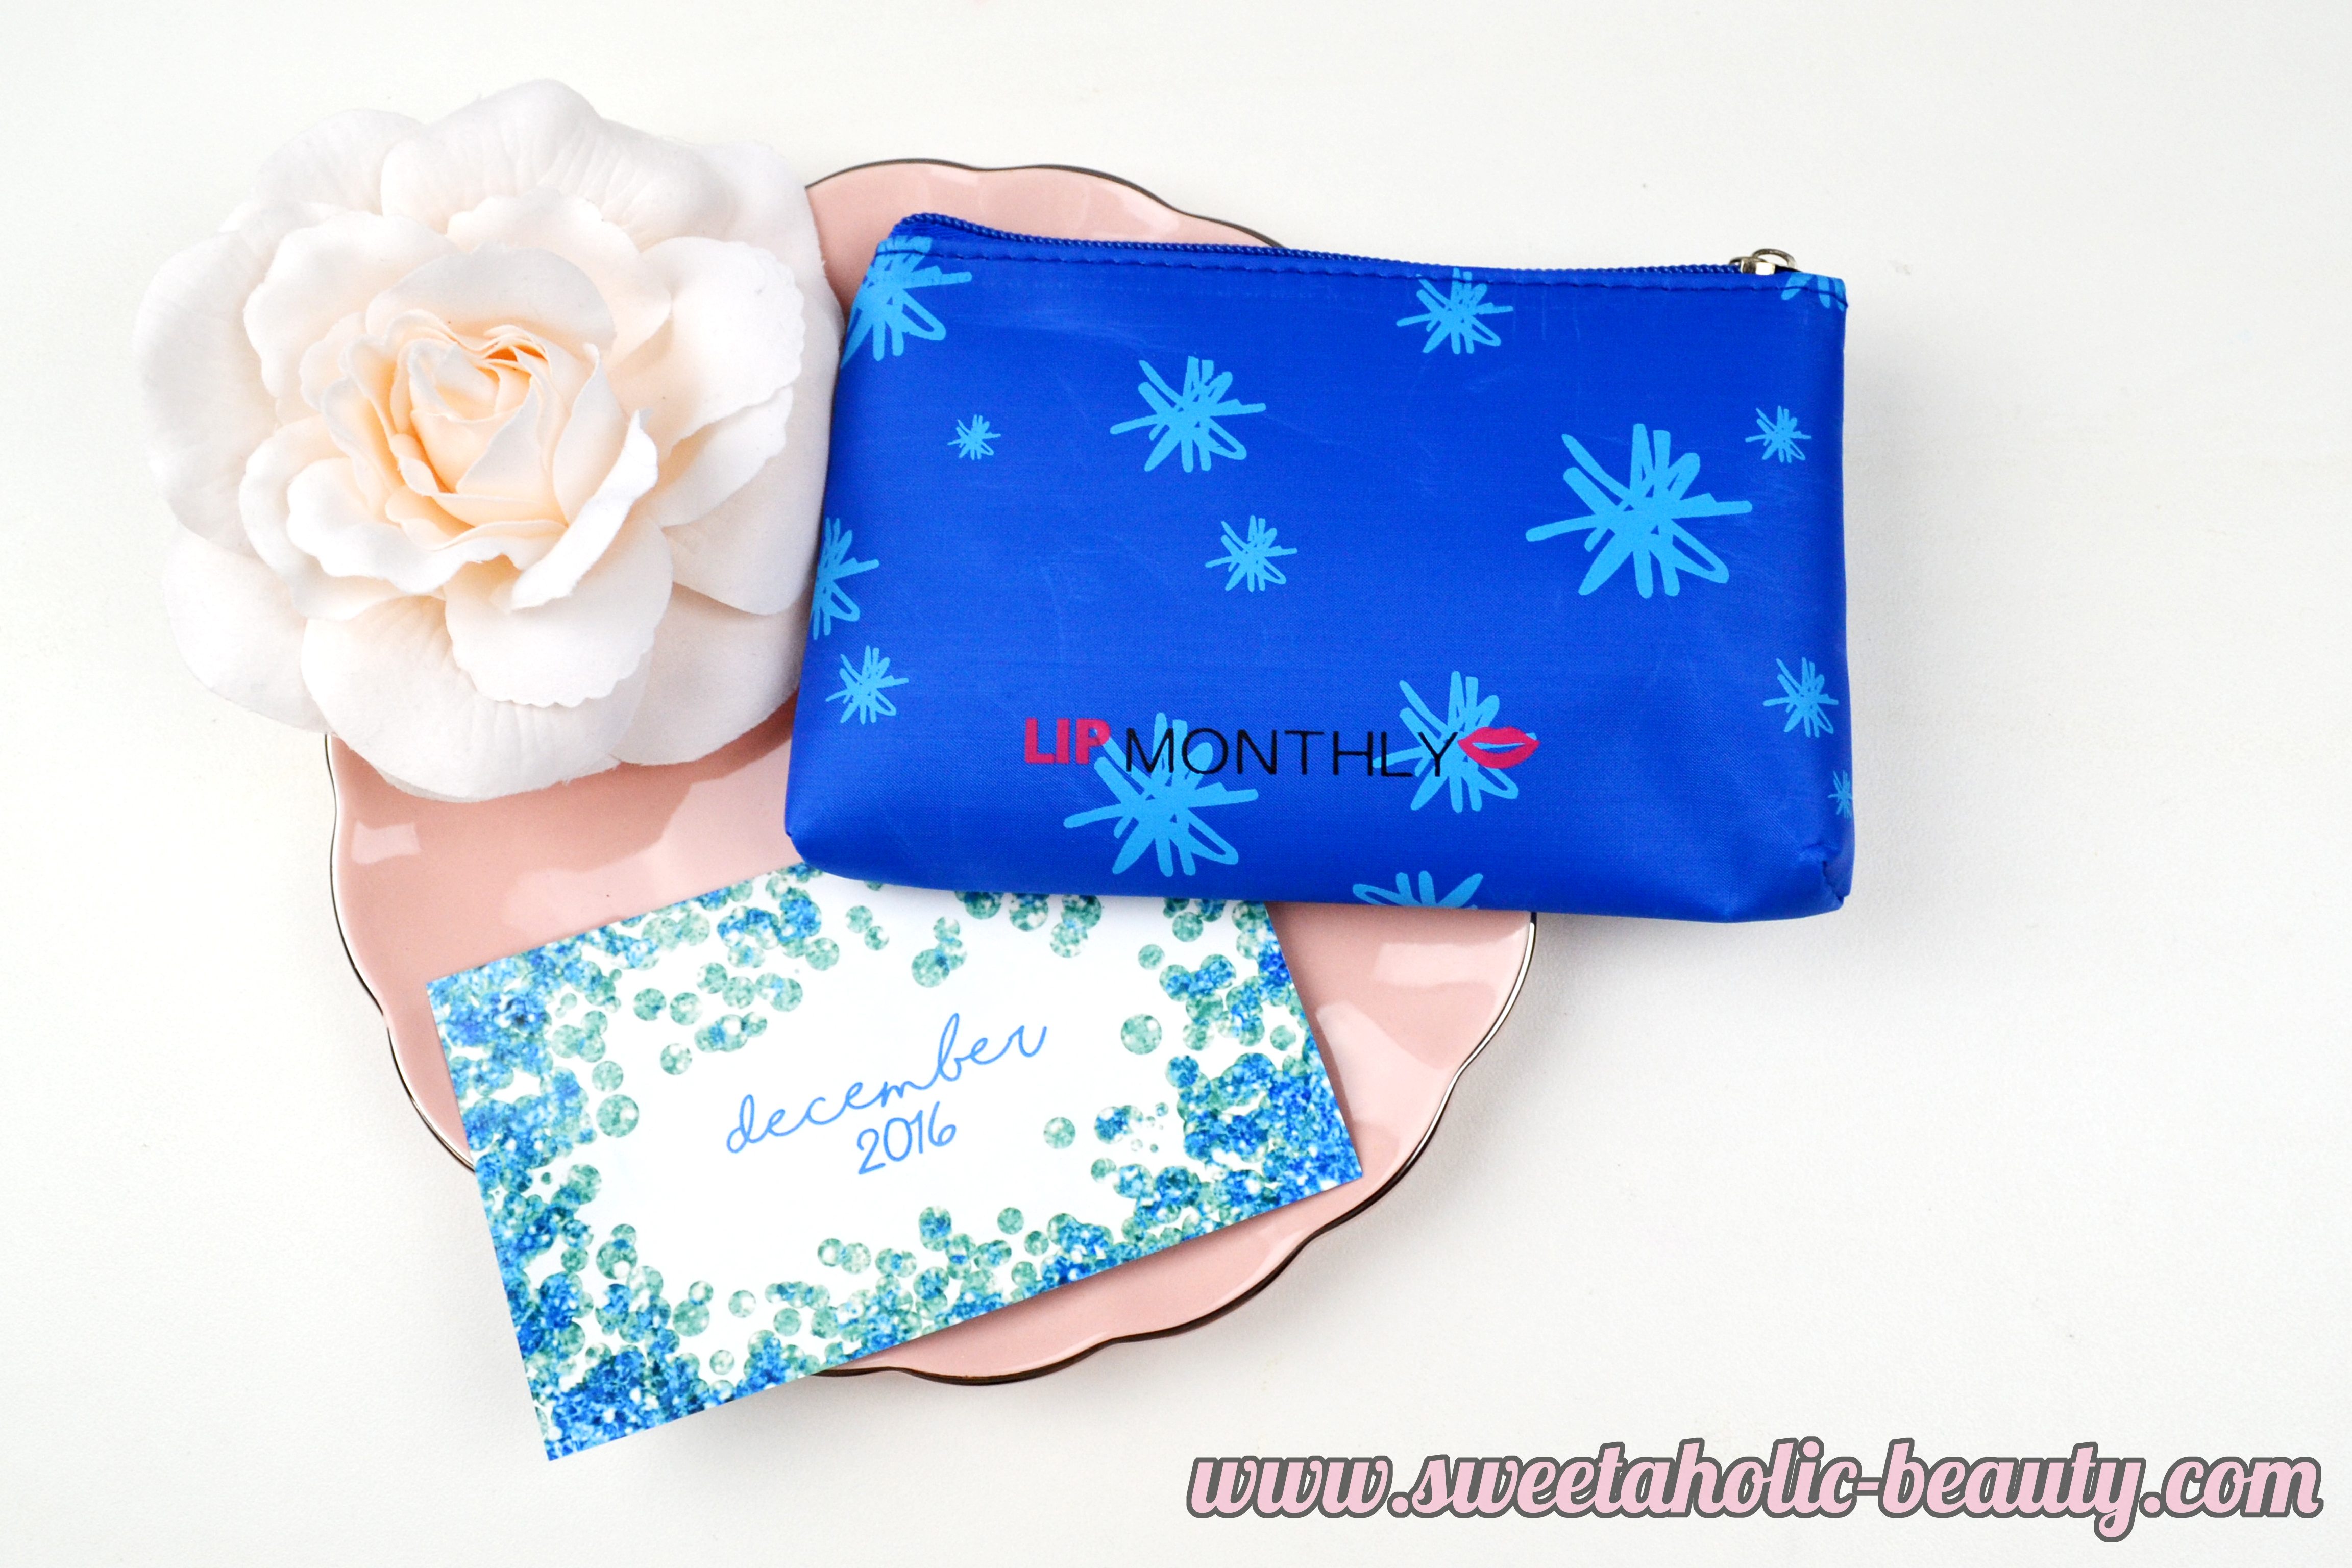 December Lip Monthly Unboxing - Sweetaholic Beauty